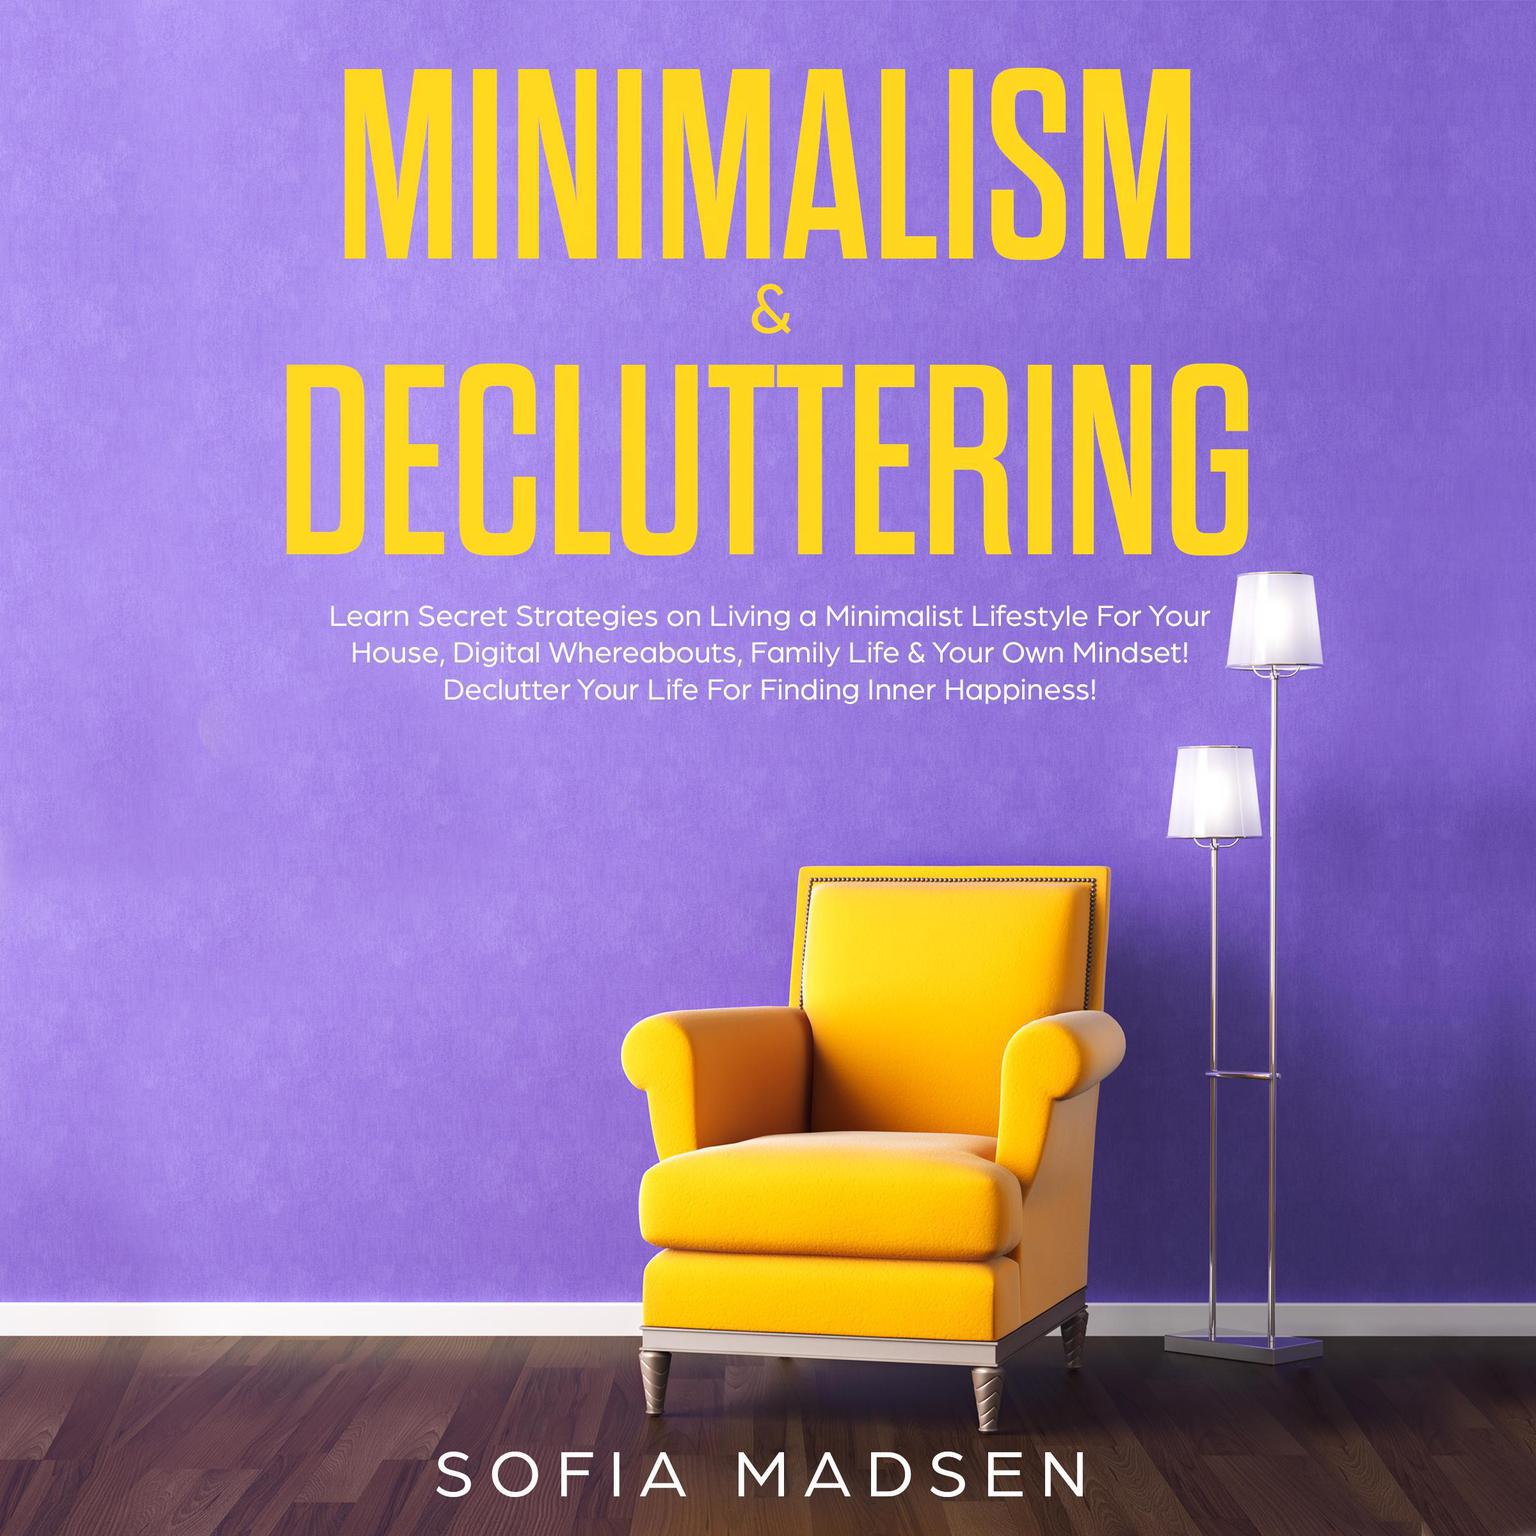 Minimalism & Decluttering: Learn Secret Strategies on Living a Minimalist Lifestyle for Your House, Digital Whereabouts, Family Life & Your Own Mindset! Declutter Your Life for Finding Inner Happiness Audiobook, by Sofia Madsen